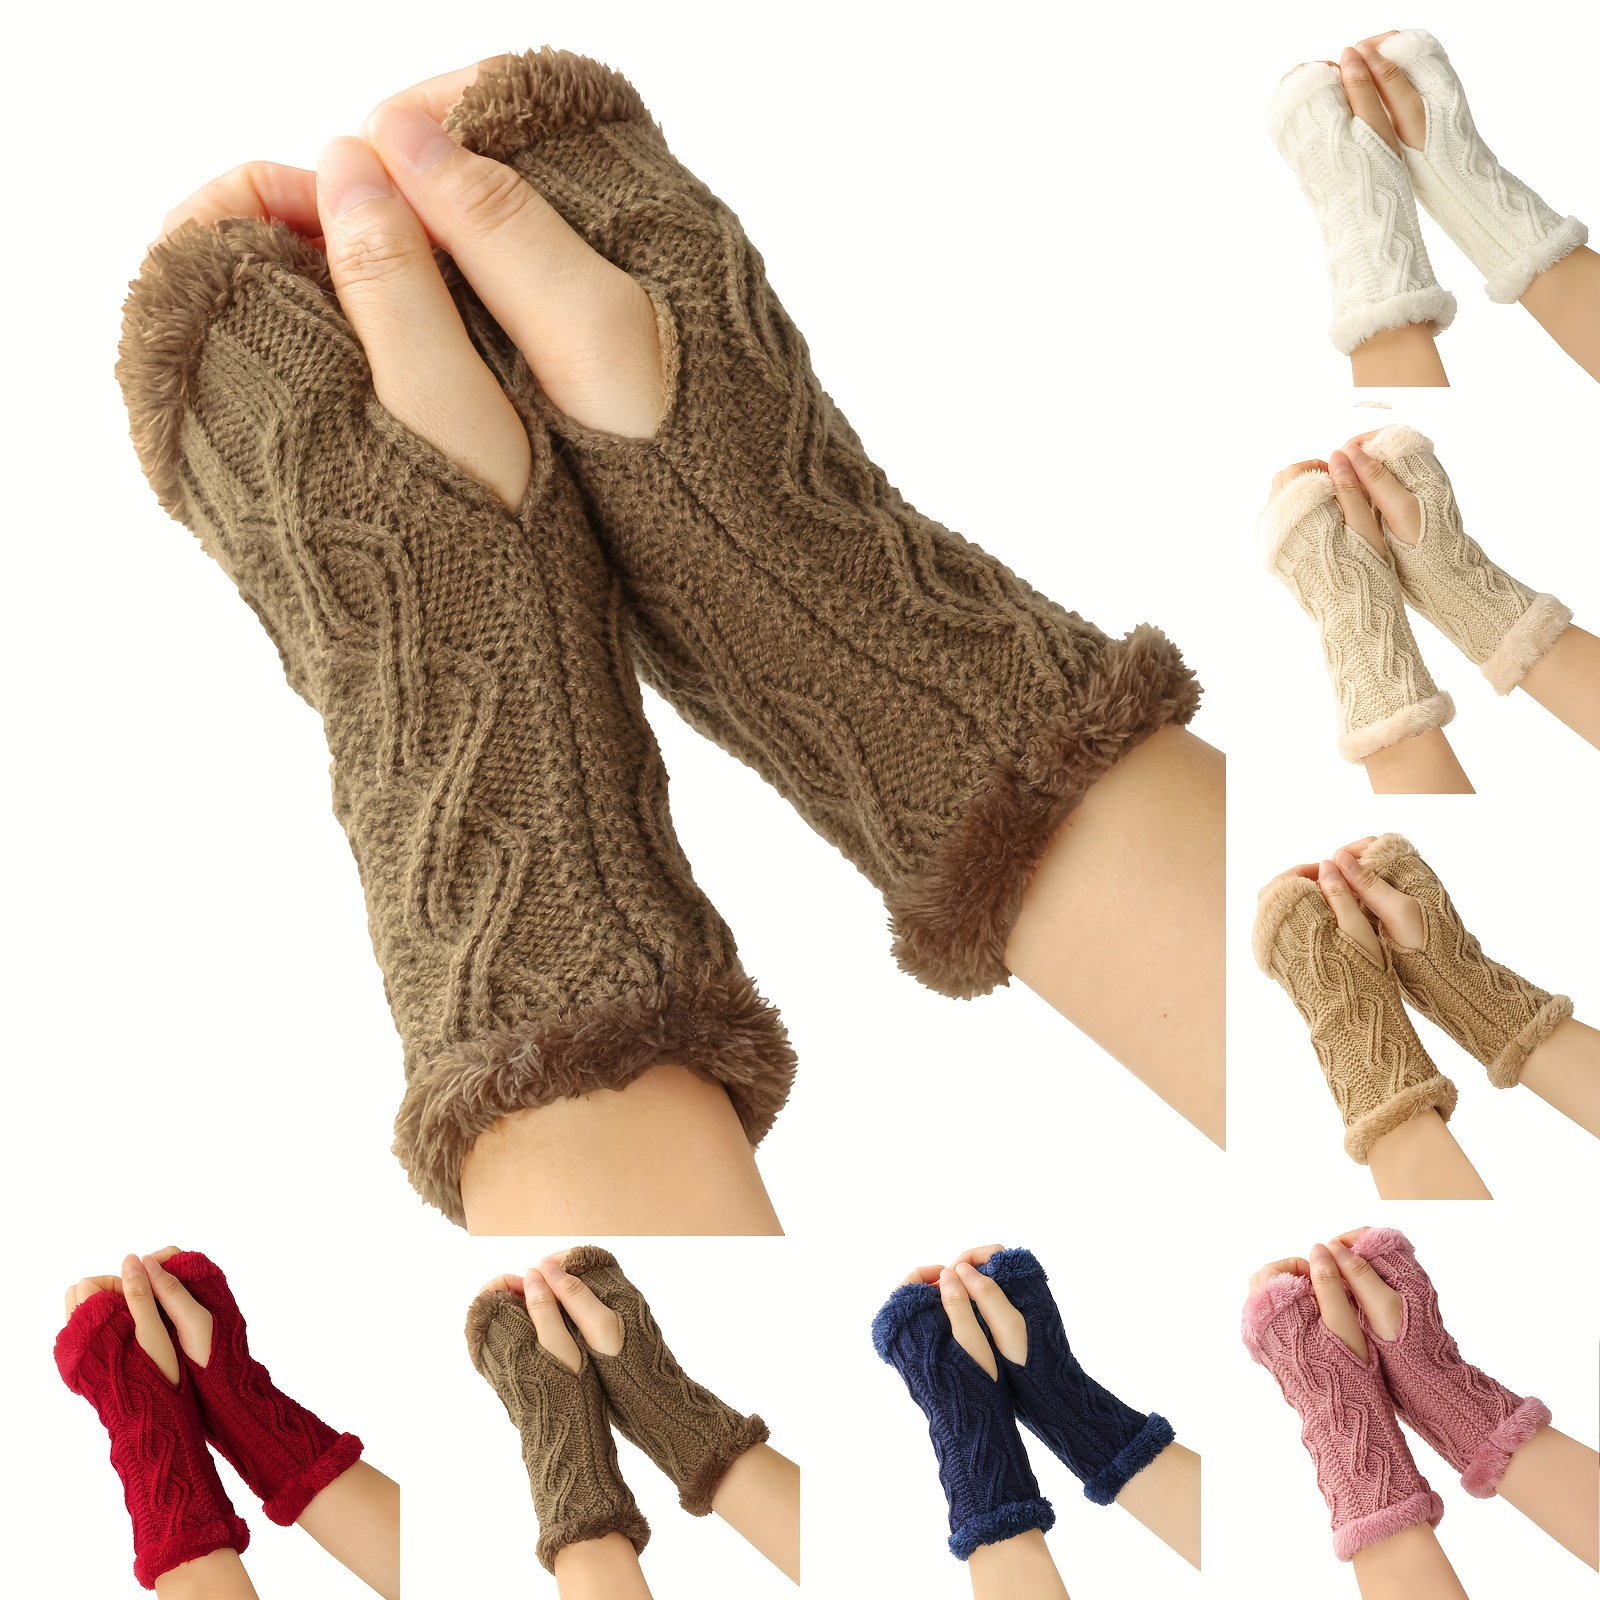 

Solid Color Twist Knit Gloves Short Velvet Lined Warm Fingerless Gloves Winter Thick Warm Wrist Cover